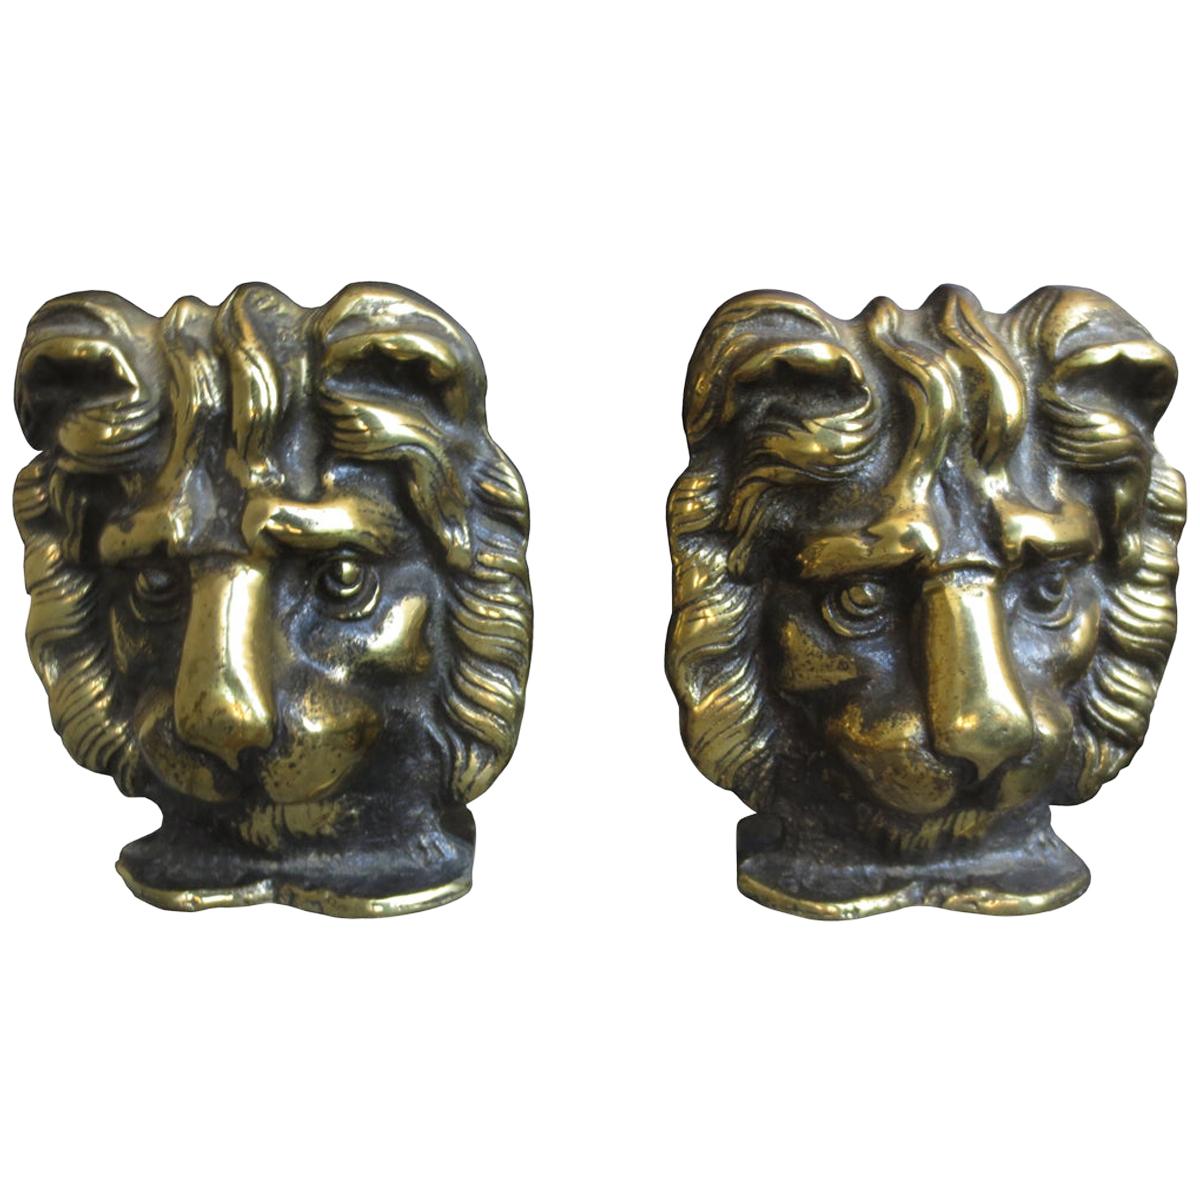 Pair of 19th-20th Century Bronze Lion Head Bookends